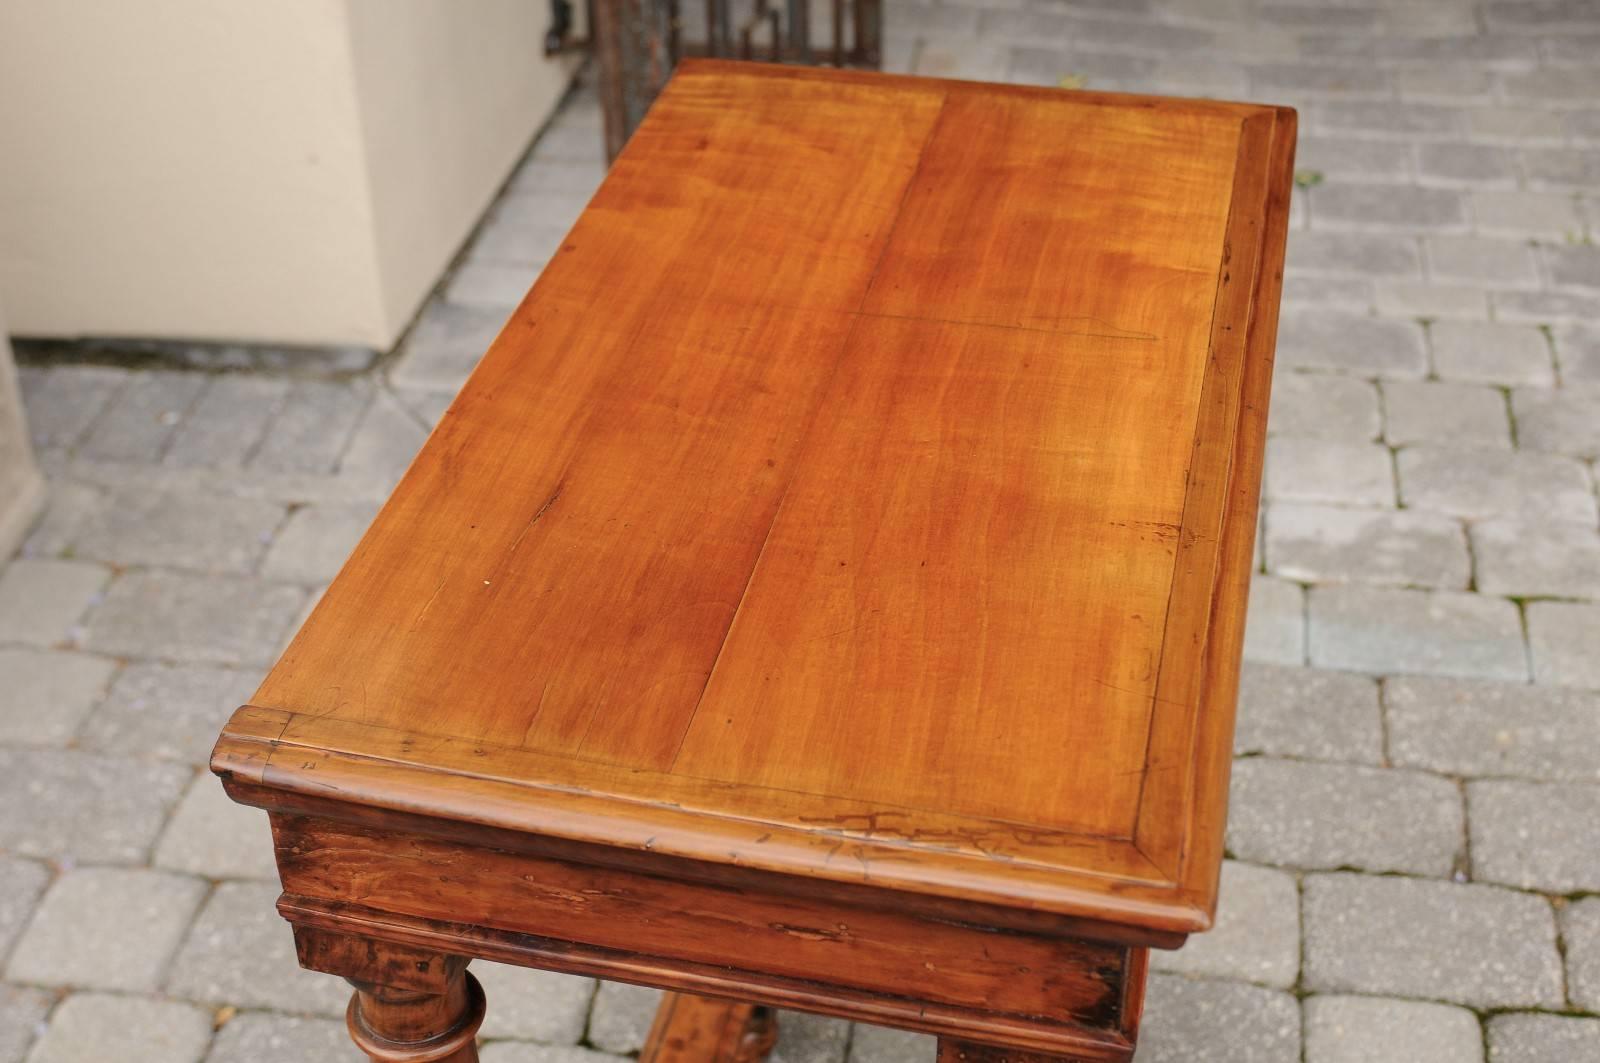 French Empire Style Mid-19th Century Fruitwood Side Table with Doric Column Legs For Sale 2